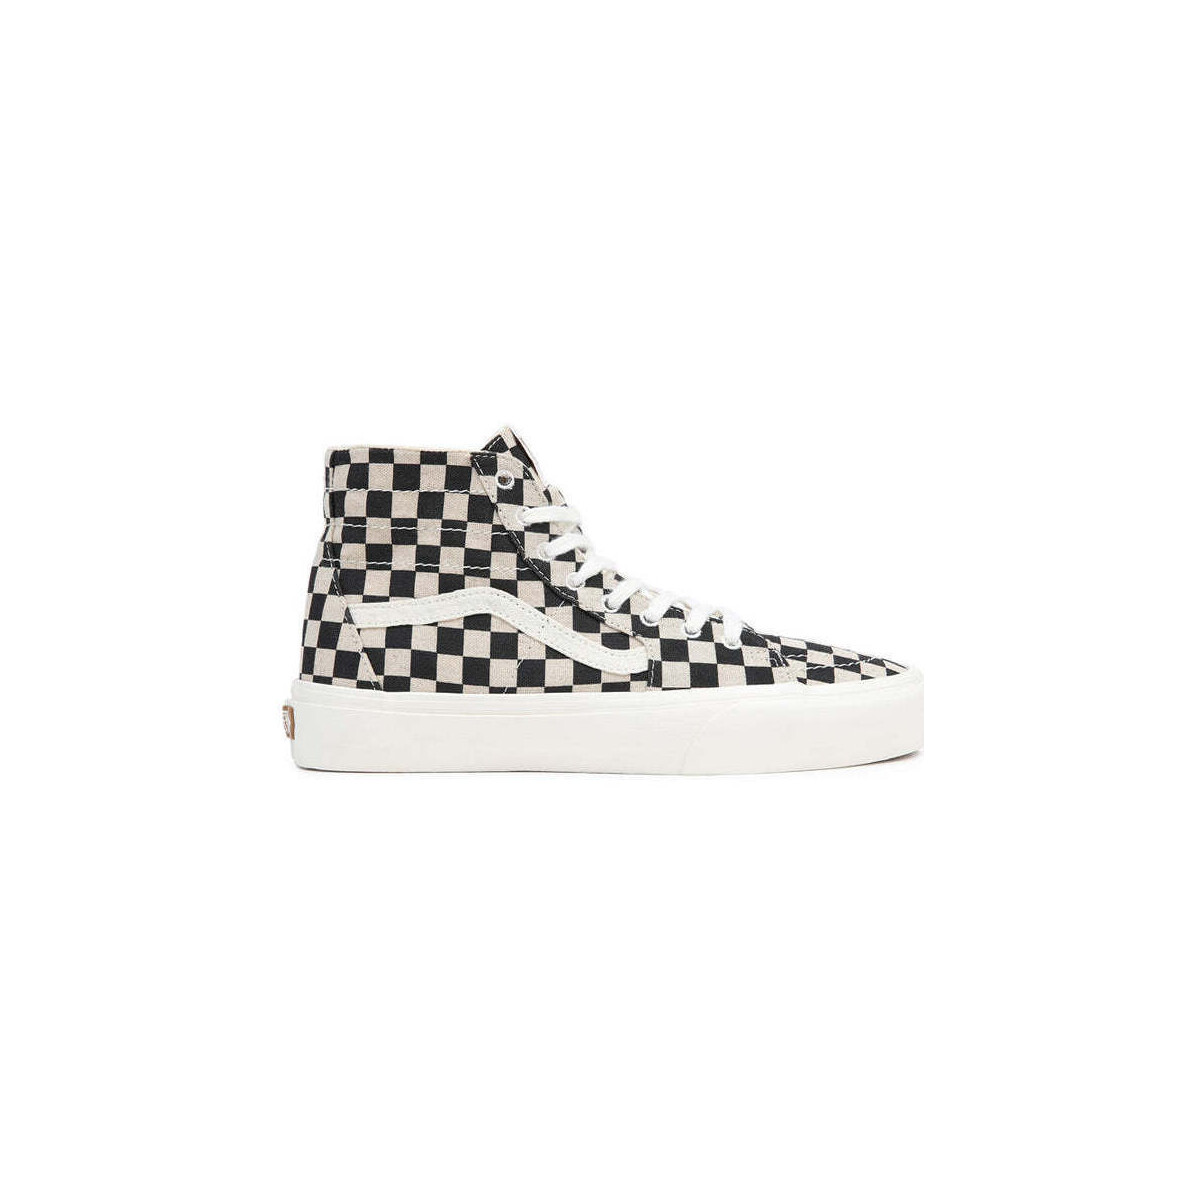 Chaussures Tennis Vans Eco Theory Sk8-Hi Tapered Checkerboard Noir